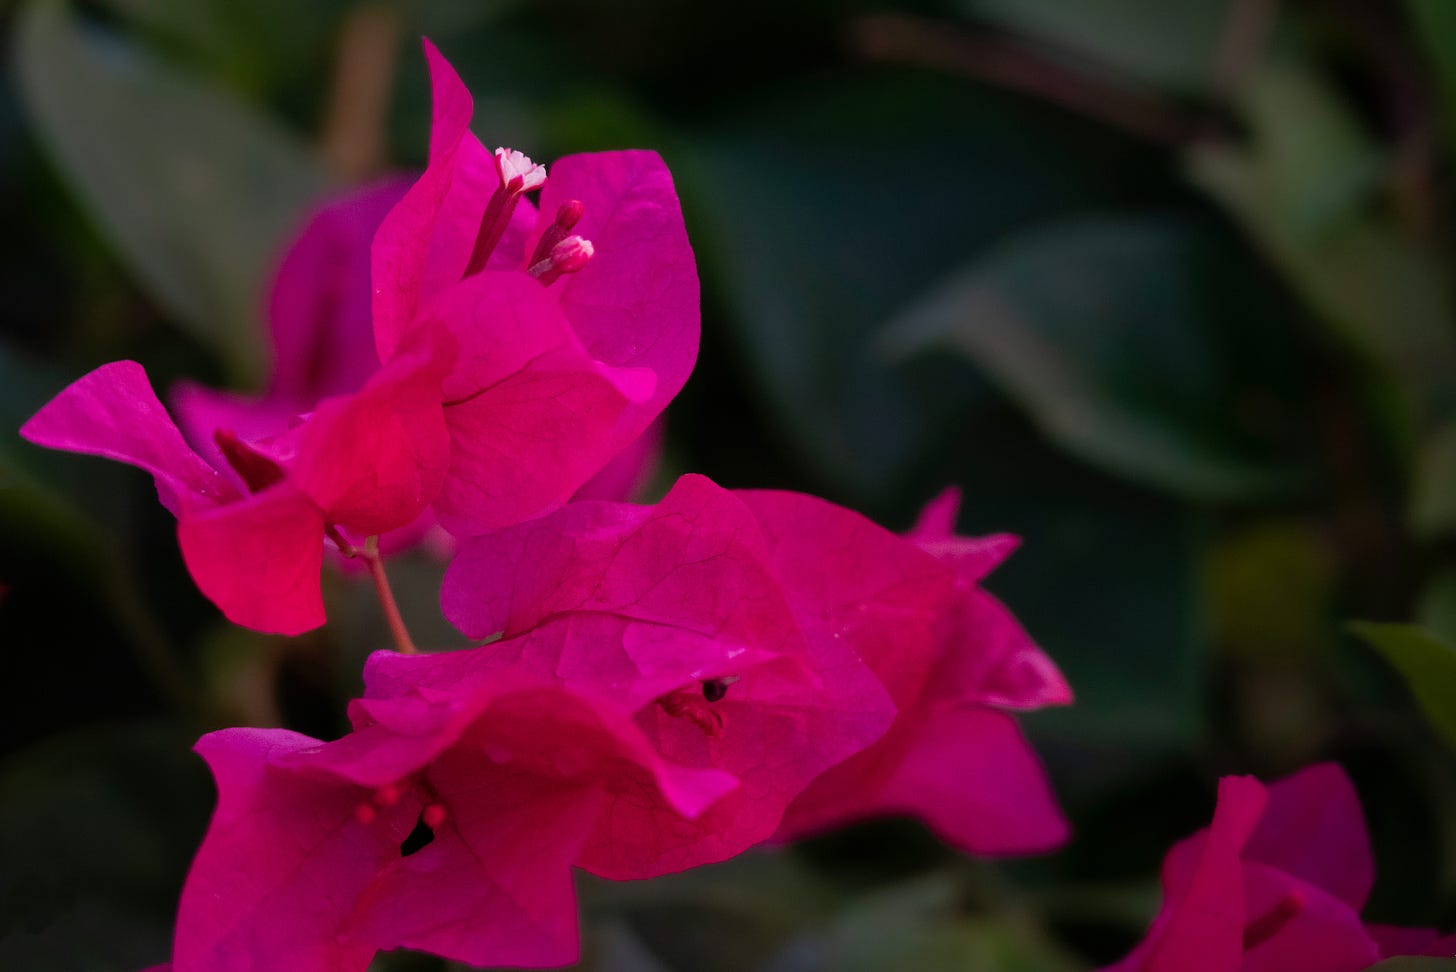 Bright magenta bougainvillea bracts with a small white flower at the center